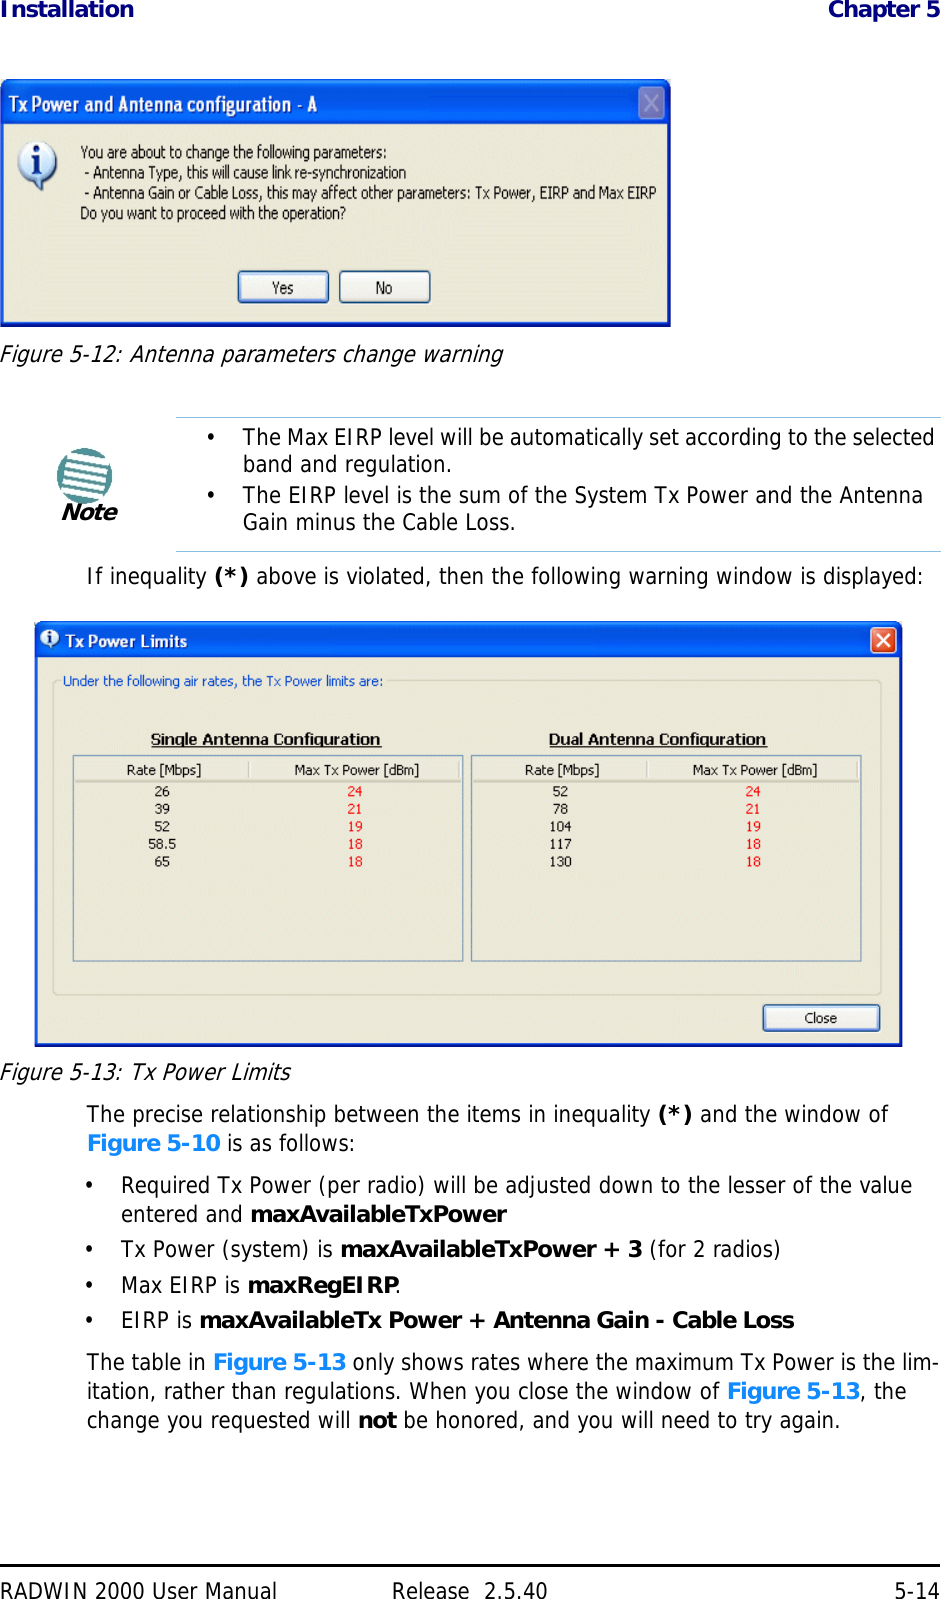 Installation Chapter 5RADWIN 2000 User Manual Release  2.5.40 5-14Figure 5-12: Antenna parameters change warningIf inequality (*) above is violated, then the following warning window is displayed:Figure 5-13: Tx Power LimitsThe precise relationship between the items in inequality (*) and the window of Figure 5-10 is as follows:• Required Tx Power (per radio) will be adjusted down to the lesser of the value entered and maxAvailableTxPower• Tx Power (system) is maxAvailableTxPower + 3 (for 2 radios)•Max EIRP is maxRegEIRP.•EIRP is maxAvailableTx Power + Antenna Gain - Cable LossThe table in Figure 5-13 only shows rates where the maximum Tx Power is the lim-itation, rather than regulations. When you close the window of Figure 5-13, the change you requested will not be honored, and you will need to try again.Note• The Max EIRP level will be automatically set according to the selected band and regulation.• The EIRP level is the sum of the System Tx Power and the Antenna Gain minus the Cable Loss.